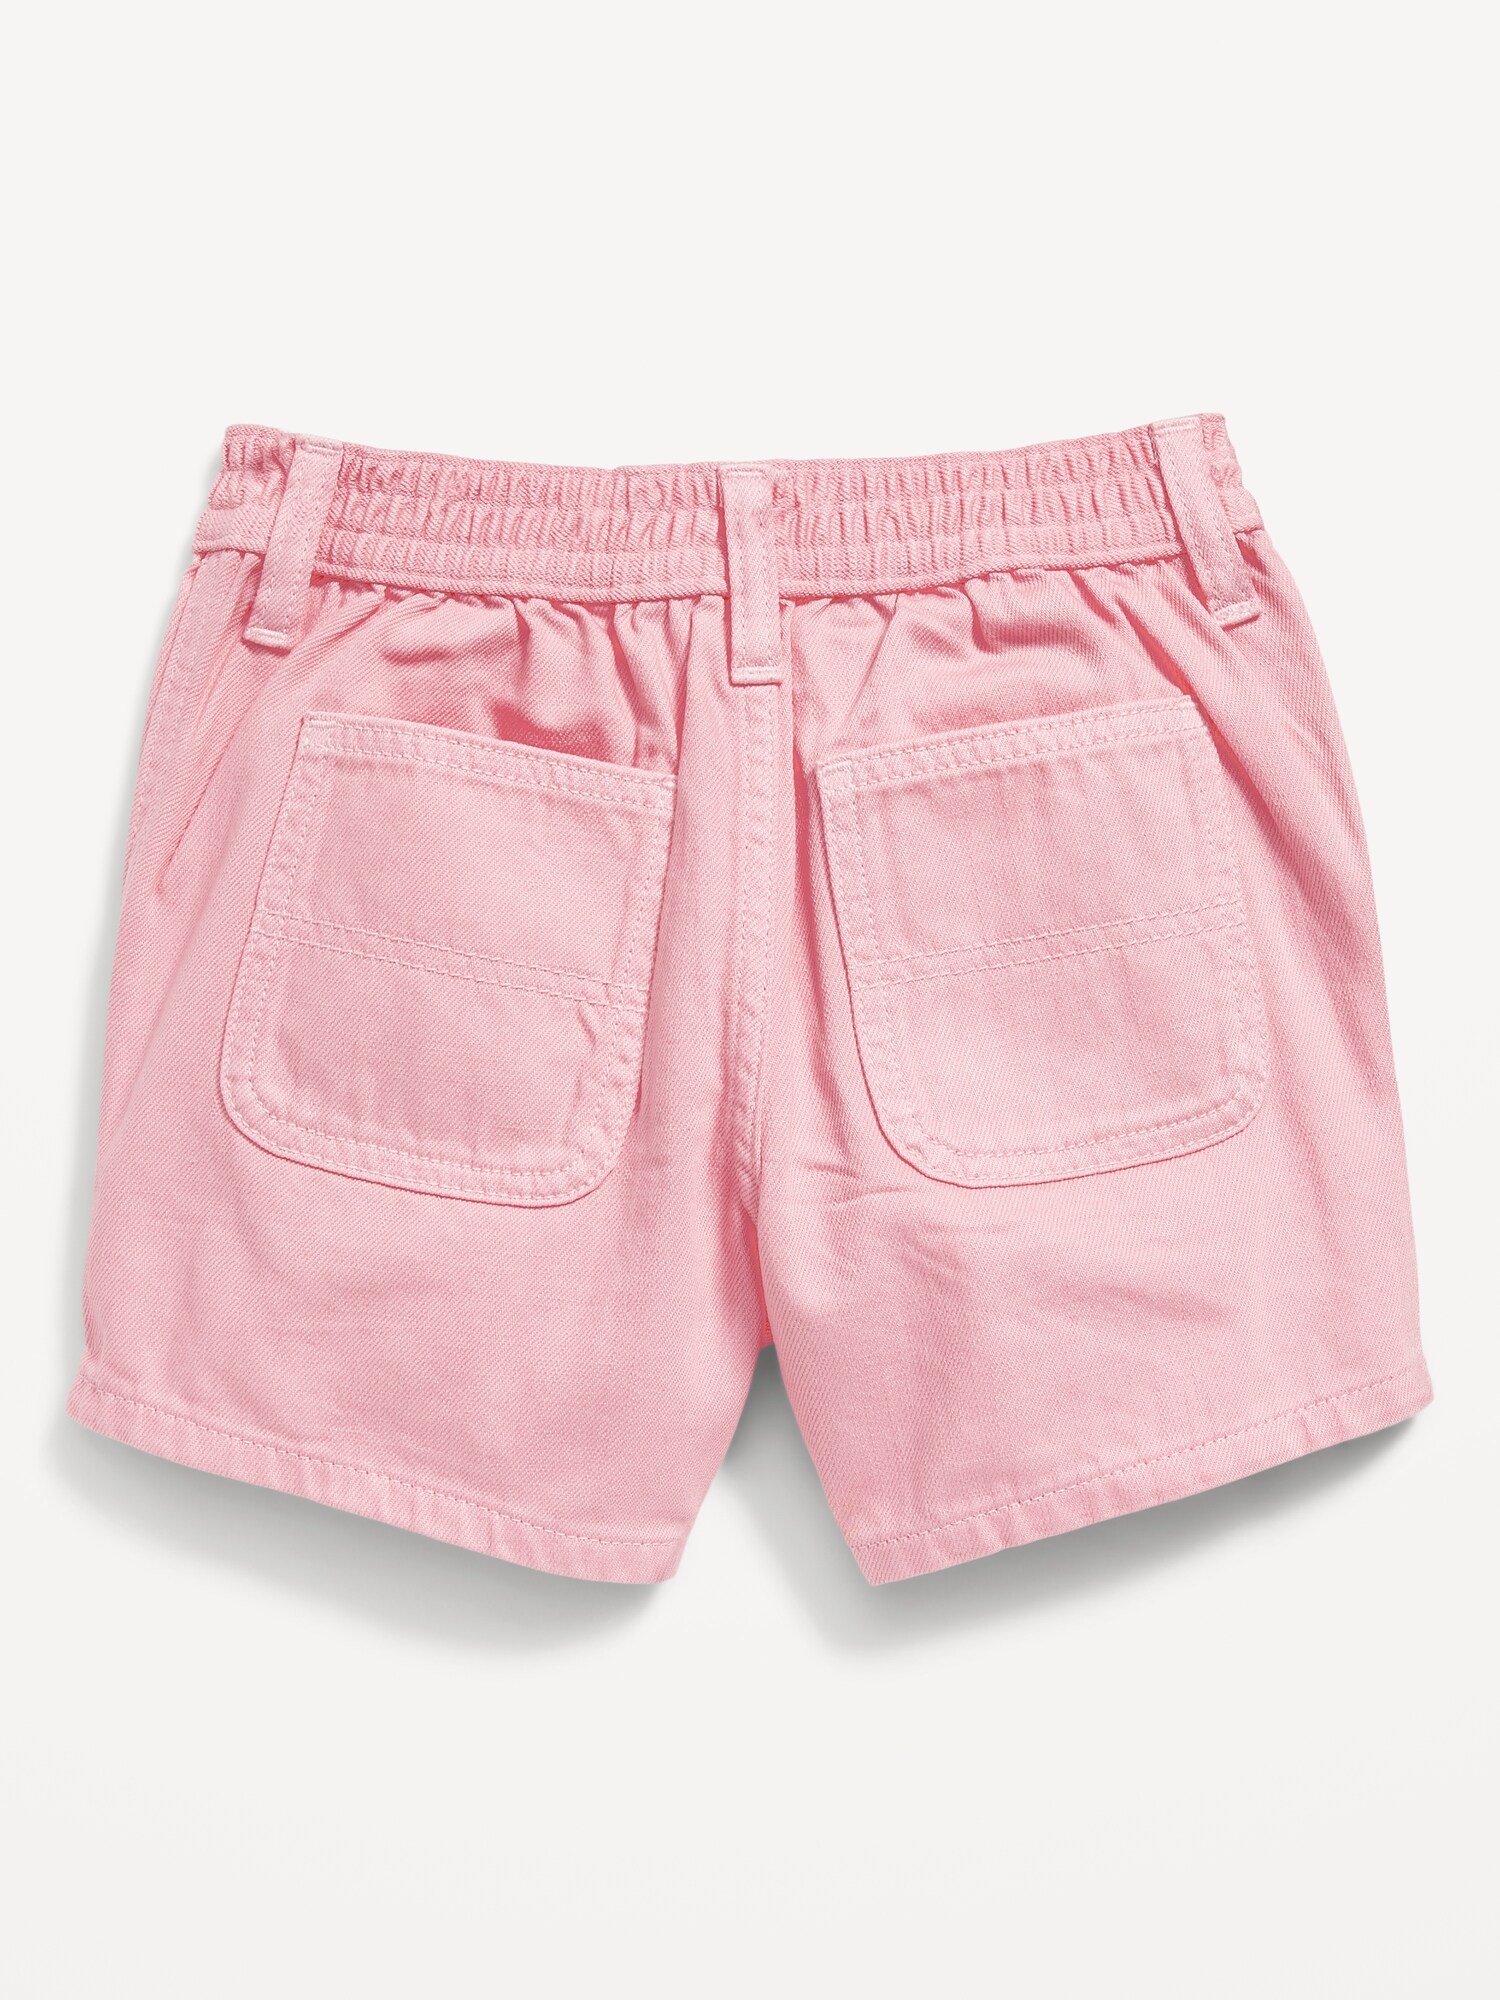 Girls Authentic Low Rise Short, No Excuses Girls - Extra Large